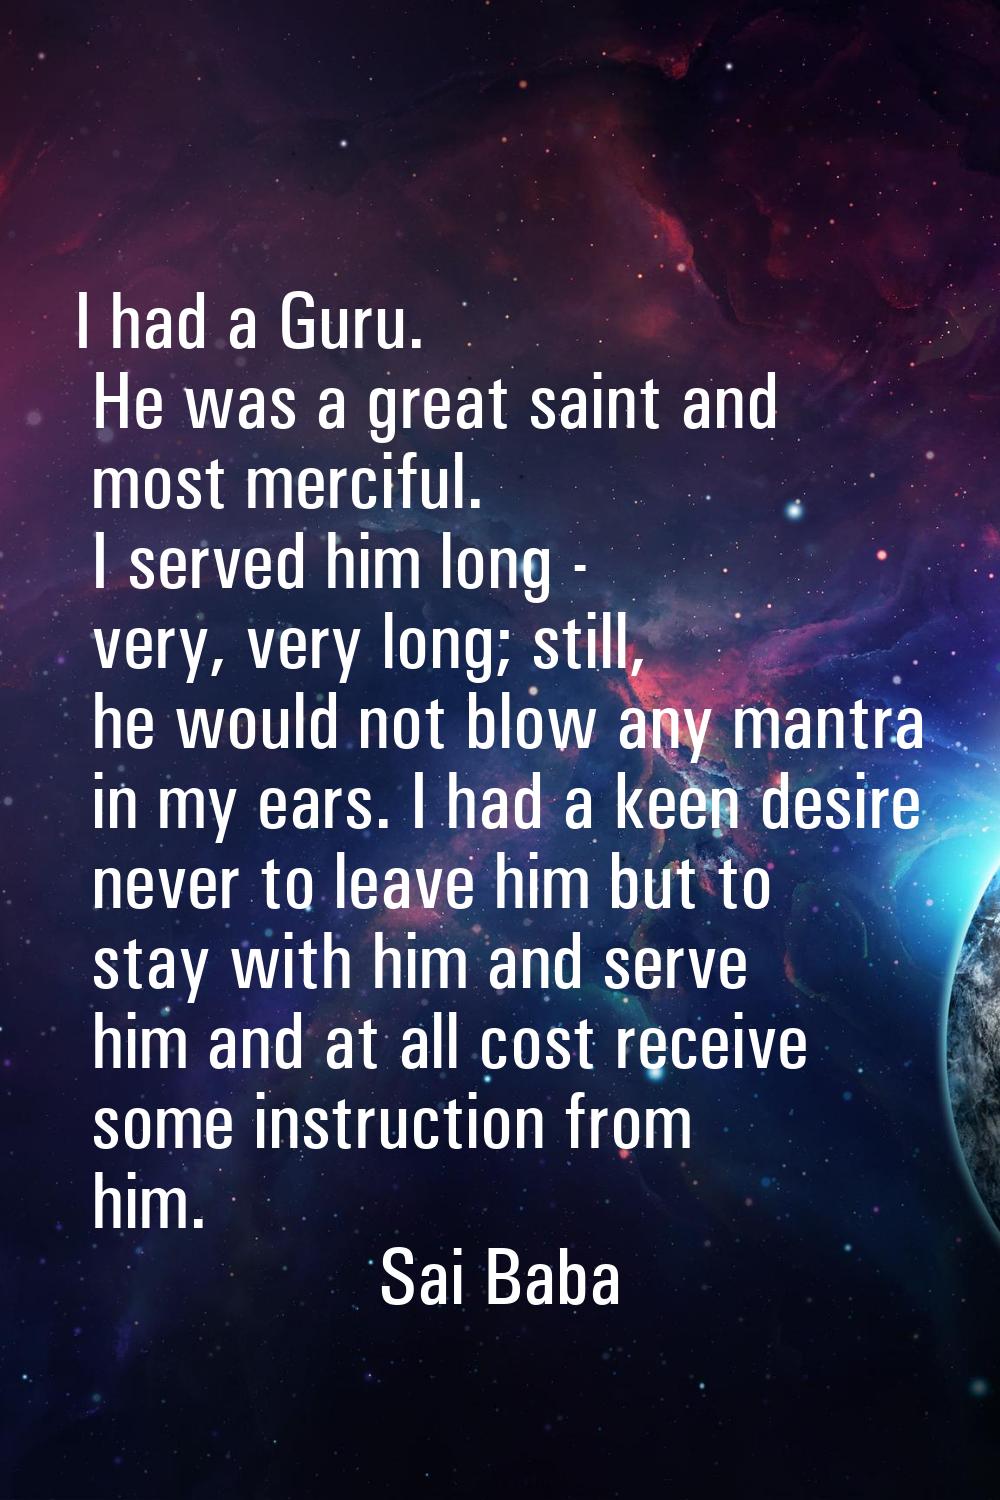 I had a Guru. He was a great saint and most merciful. I served him long - very, very long; still, h